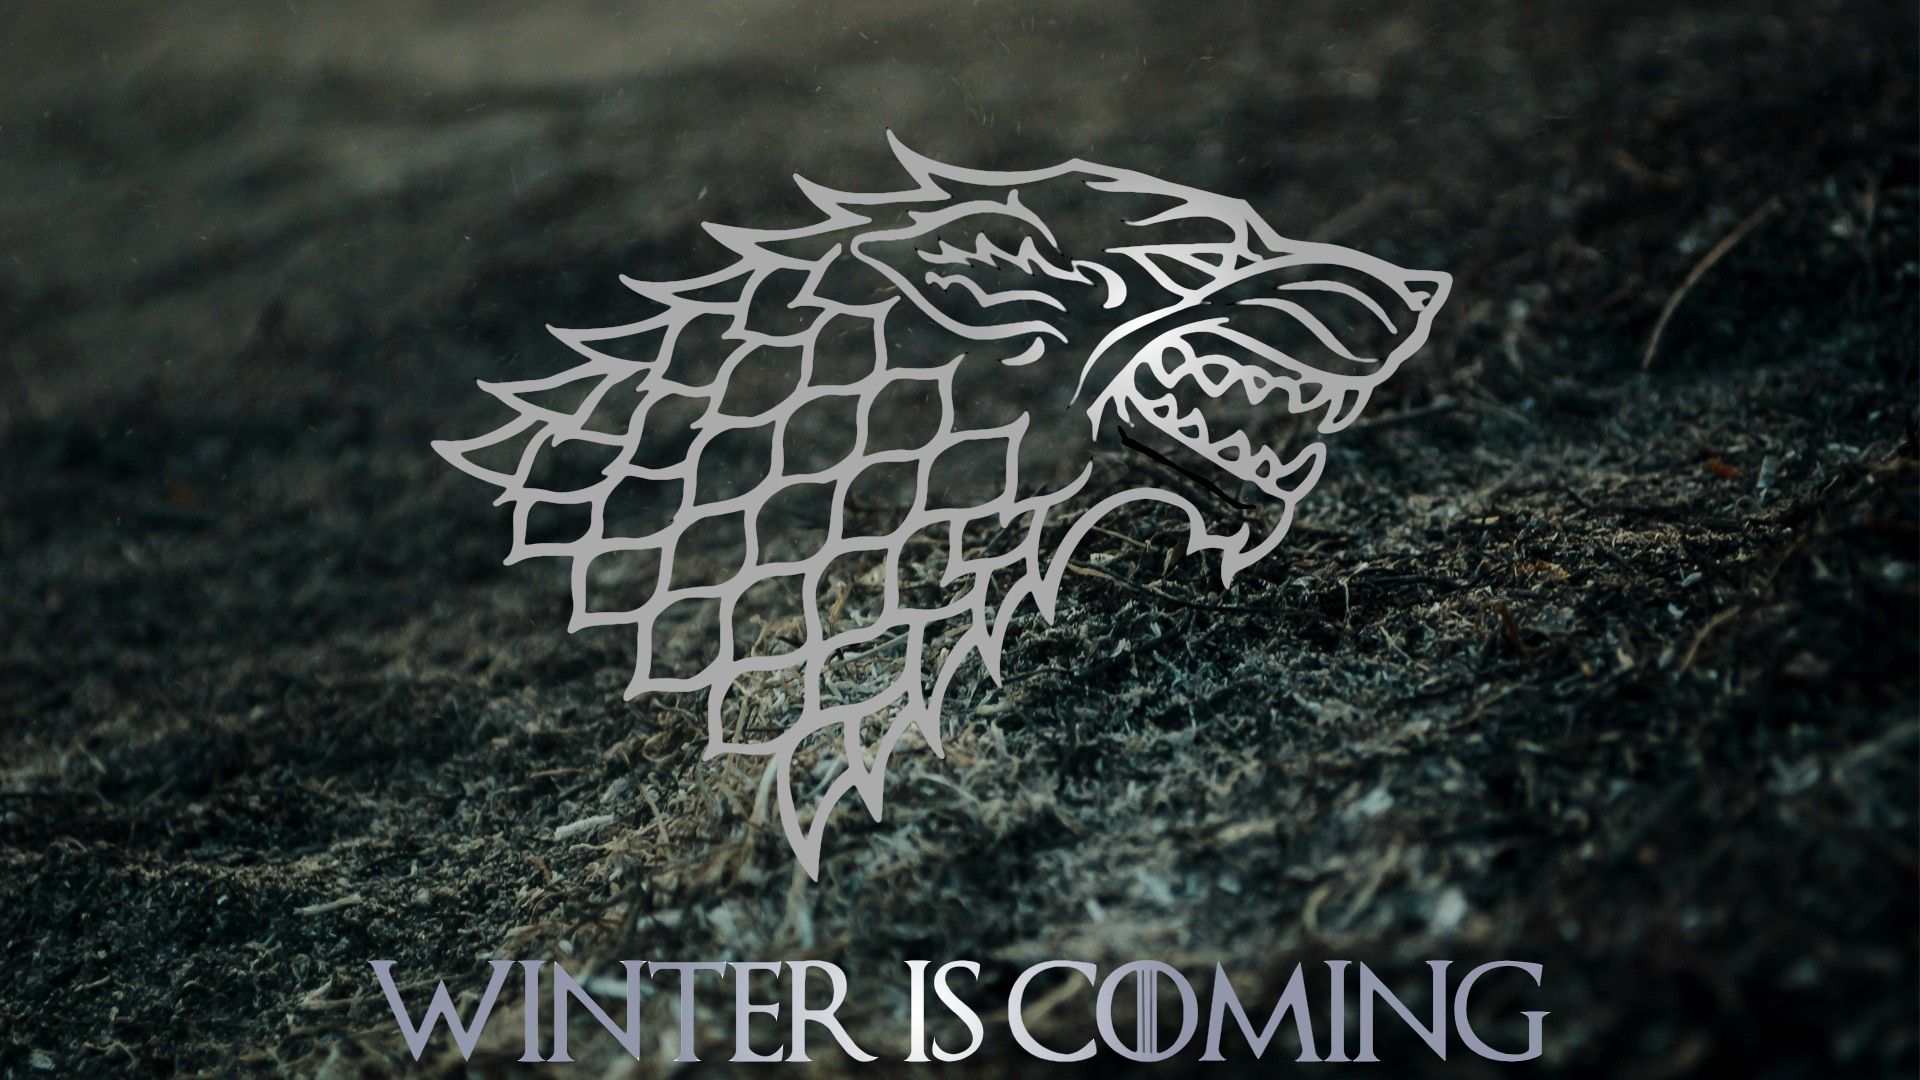 Beautiful House Stark Wallpaper Full HD Pictures